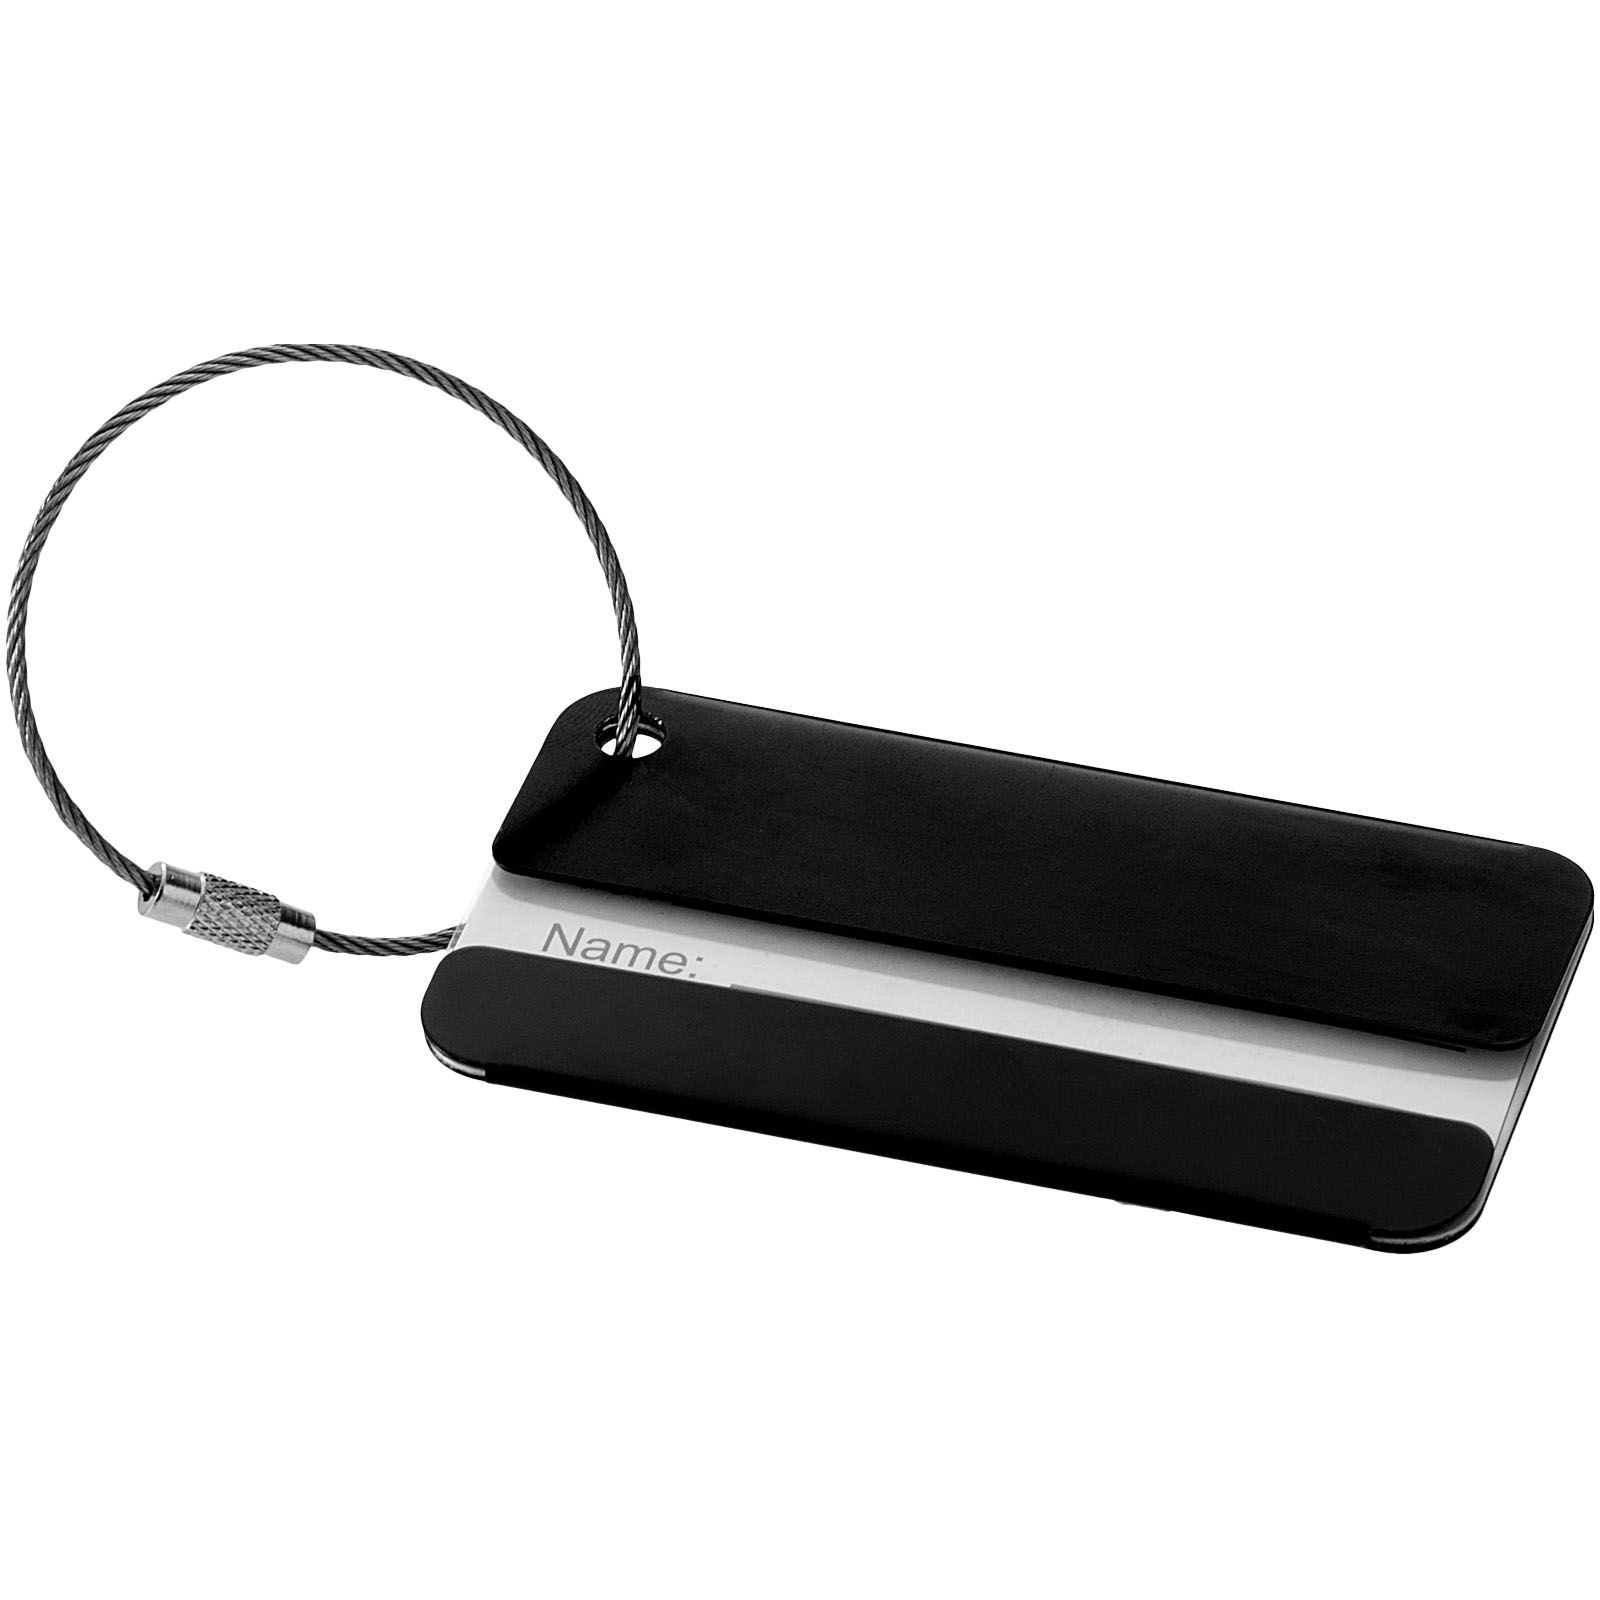 Advertising Travel Accessories - Discovery luggage tag